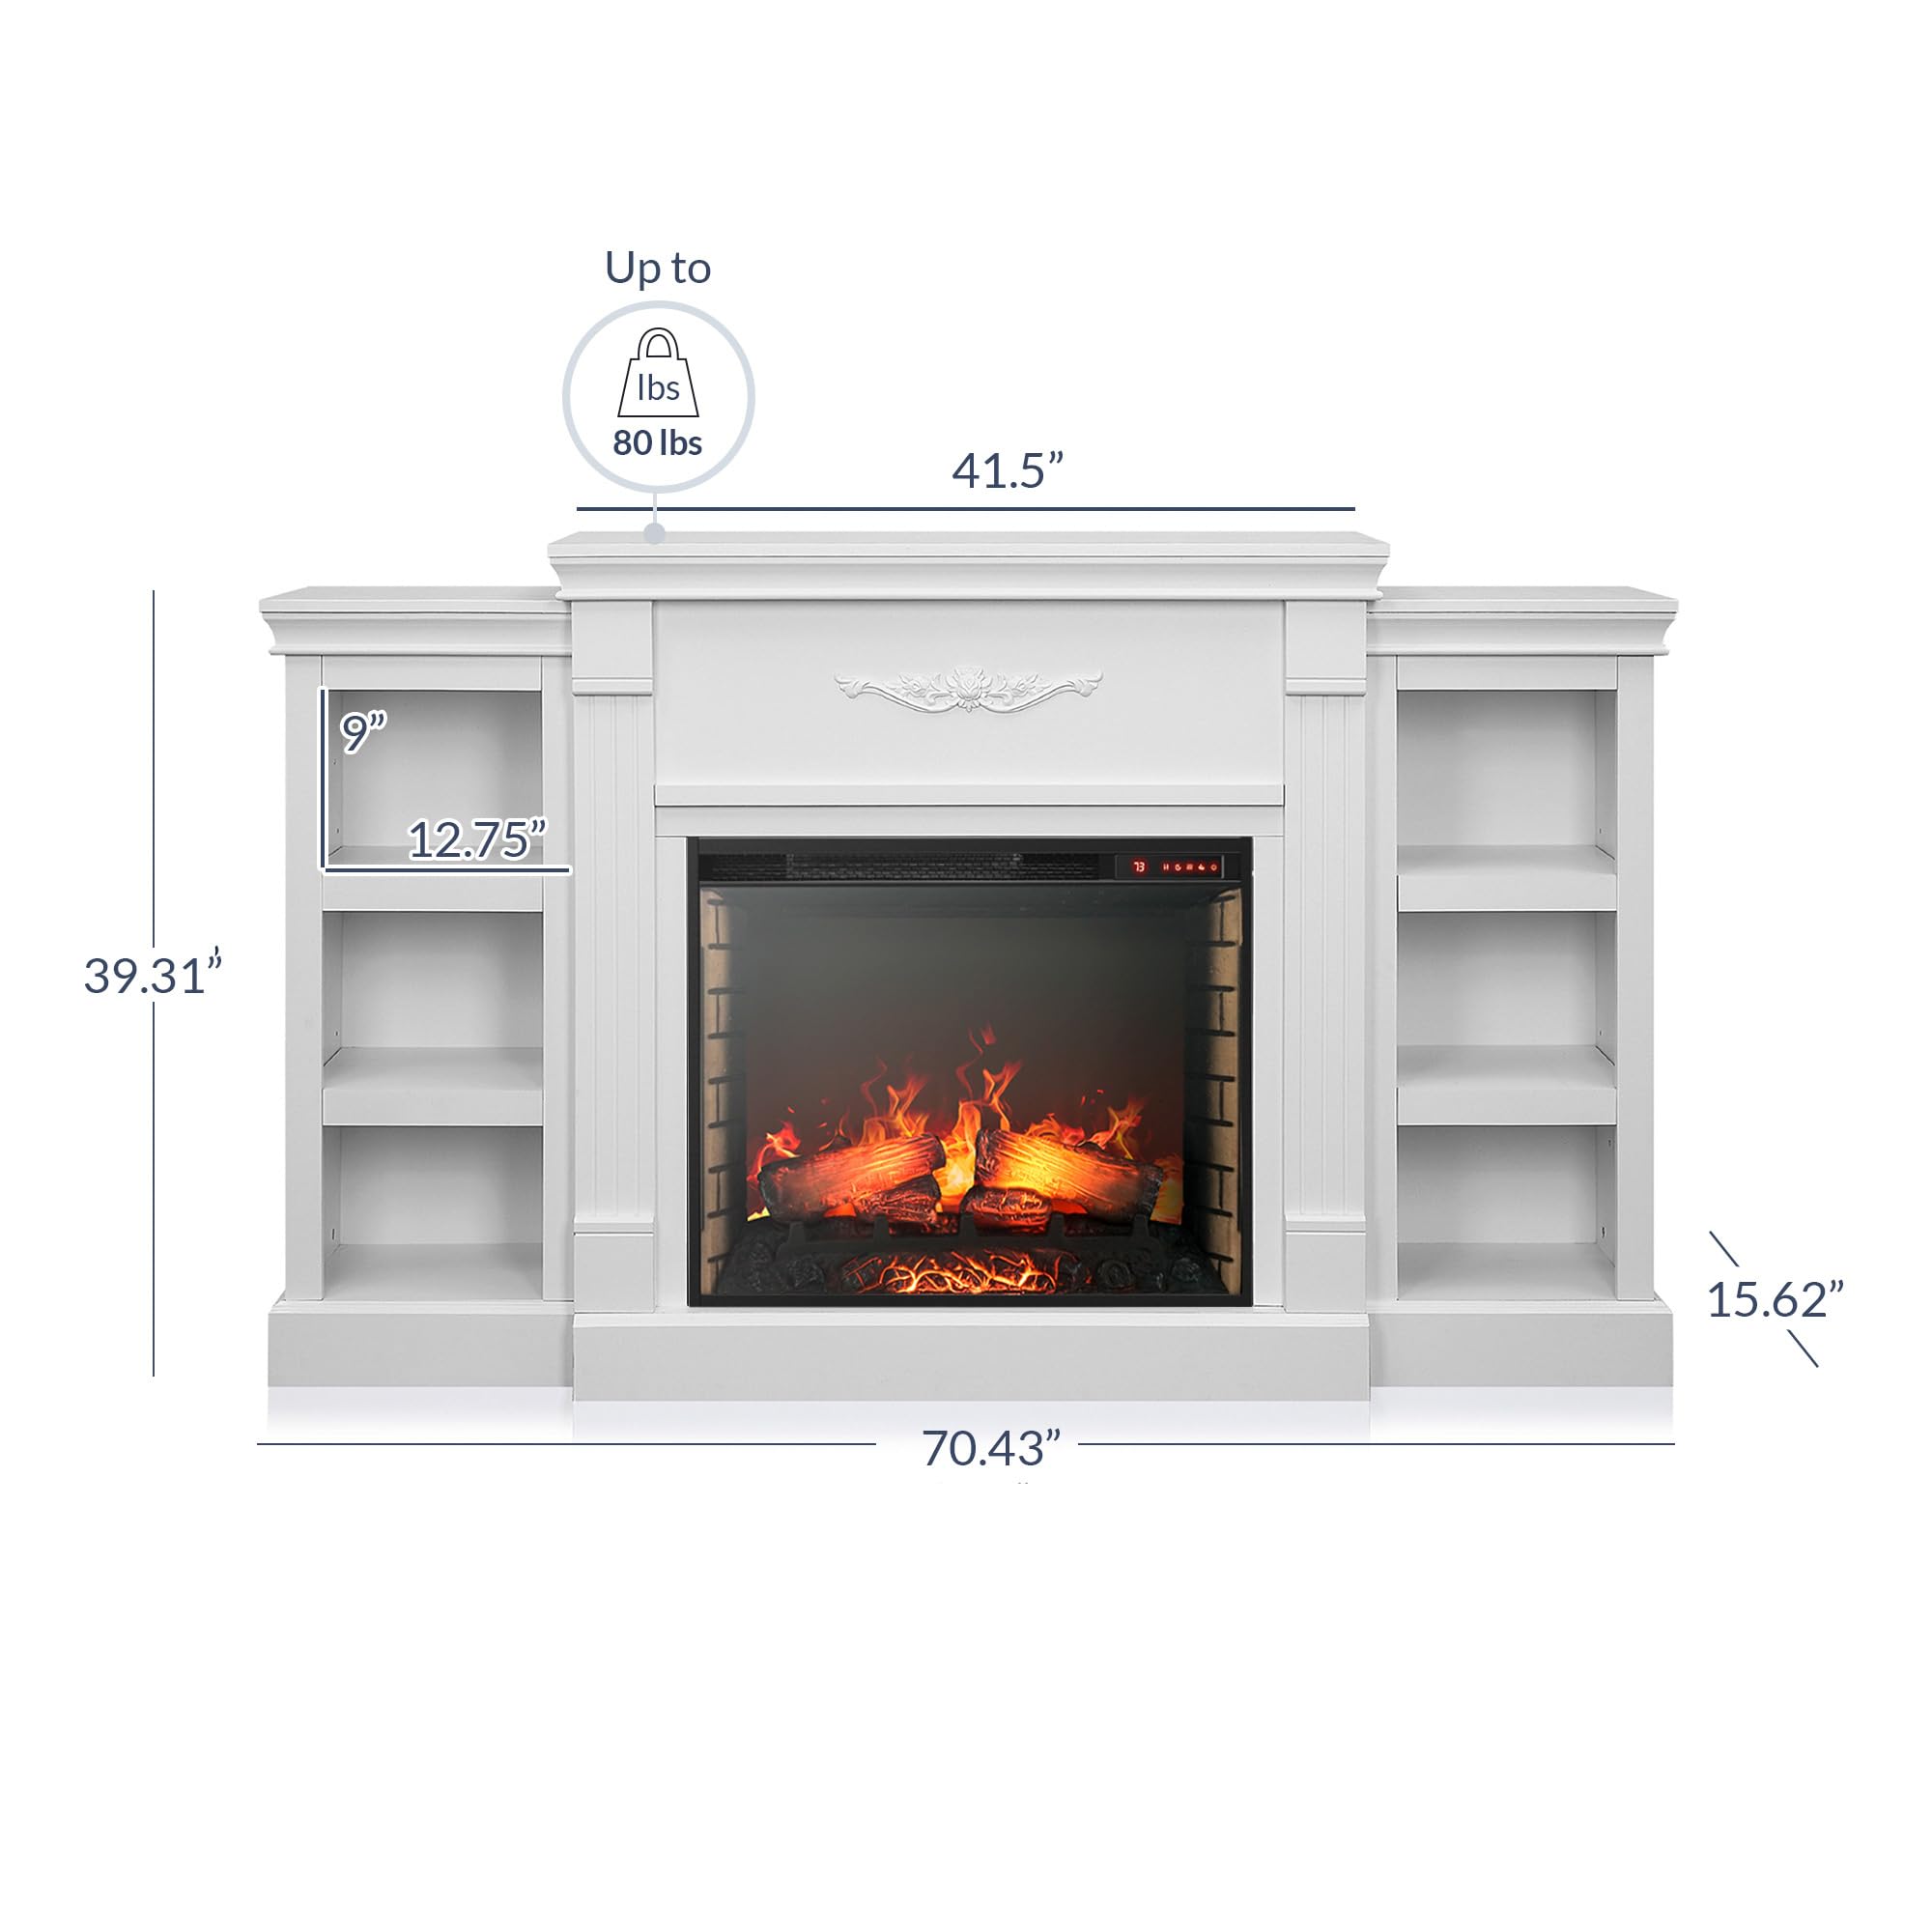 Della Electric Faux Fireplace TV Stand Mantel Heater, Entertainment Center with Built-In Bookshelves and Cabinets, Remote Control and Enhanced Log Display - White